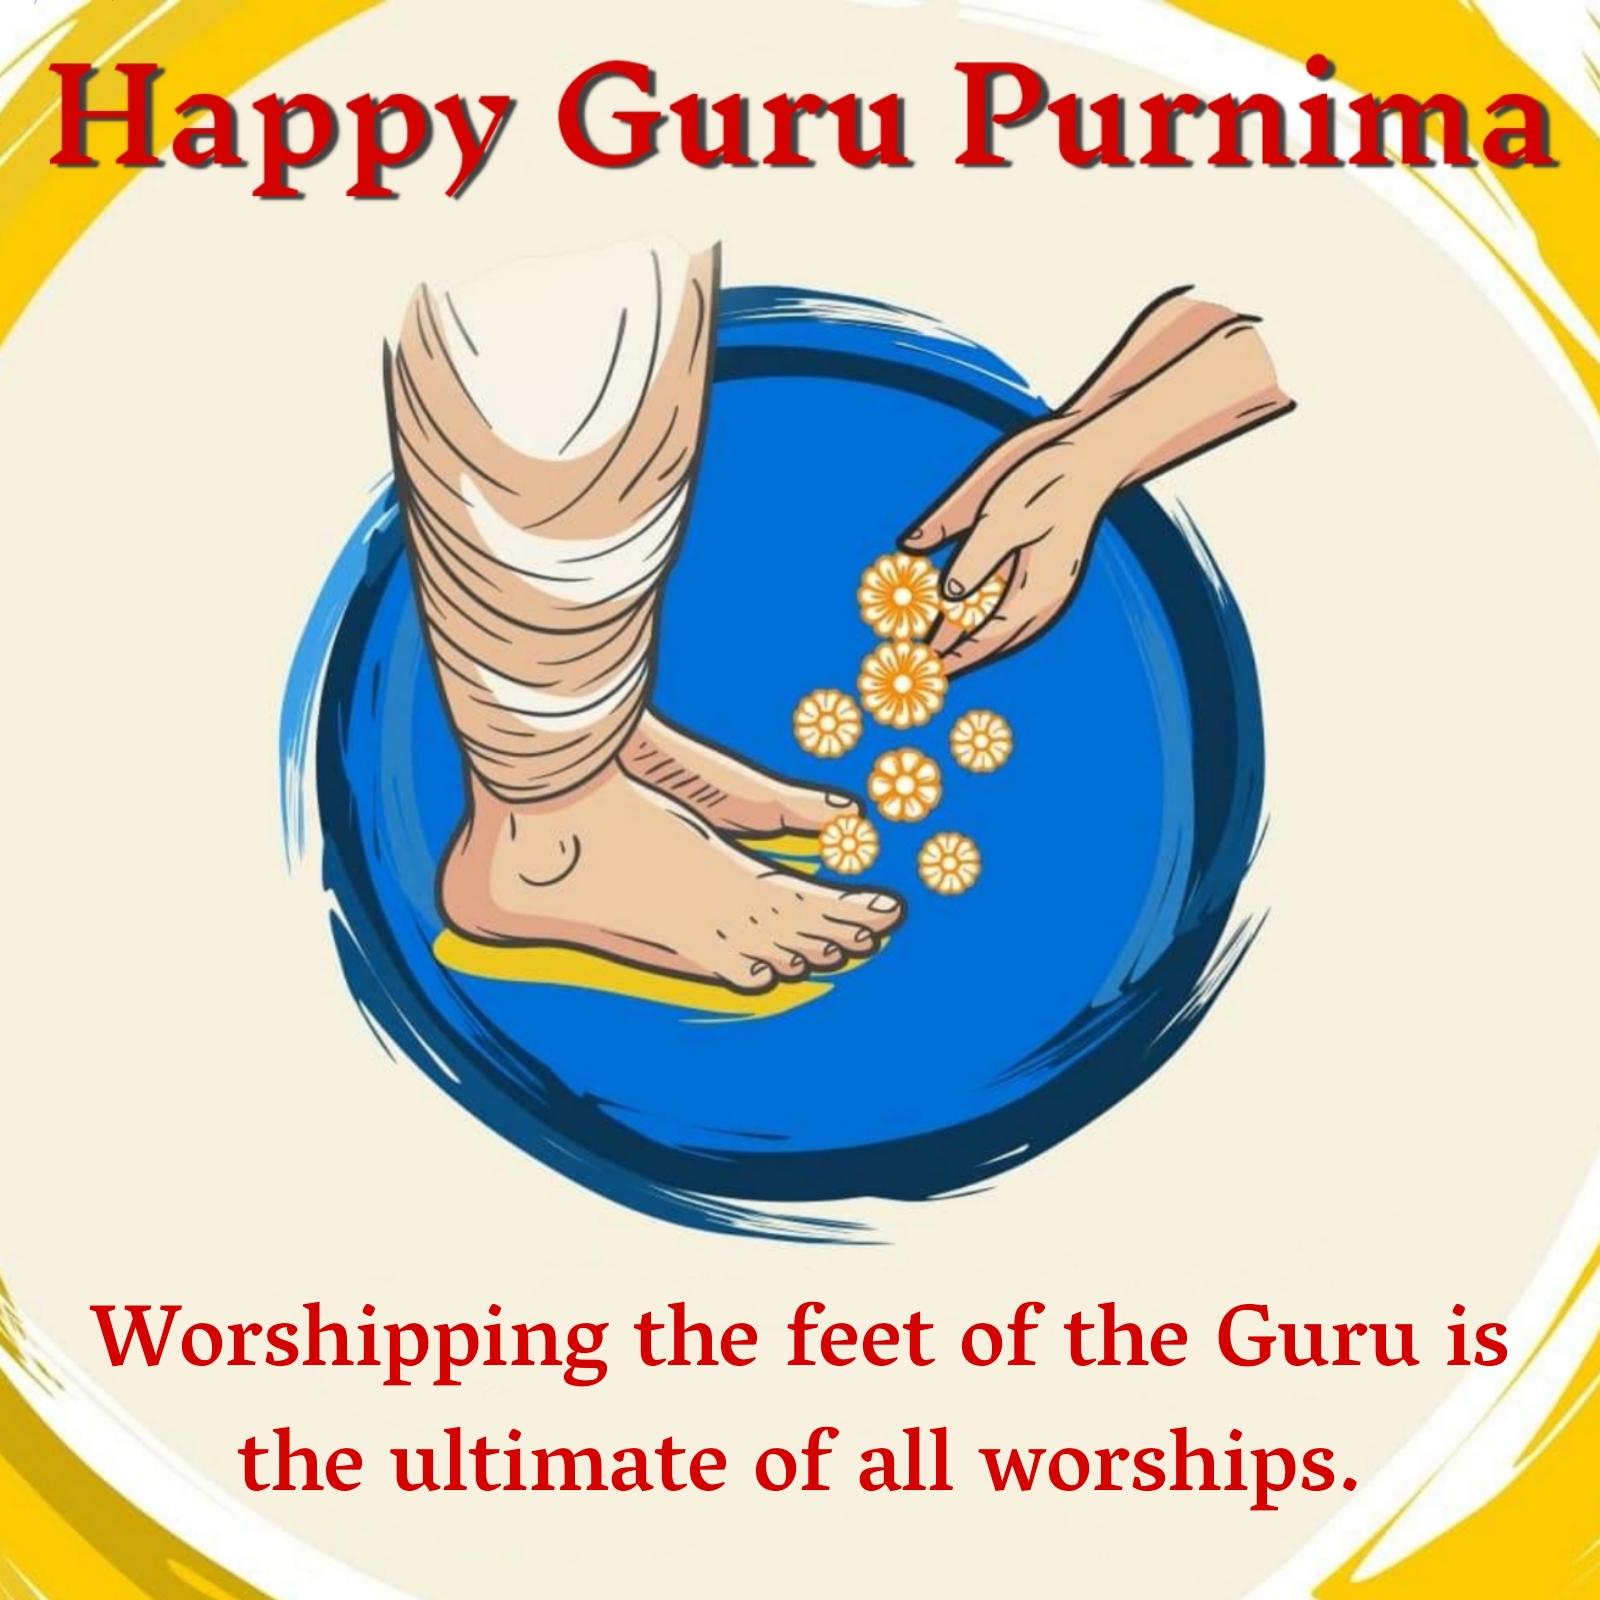 Worshipping the feet of the Guru is the ultimate of all worships